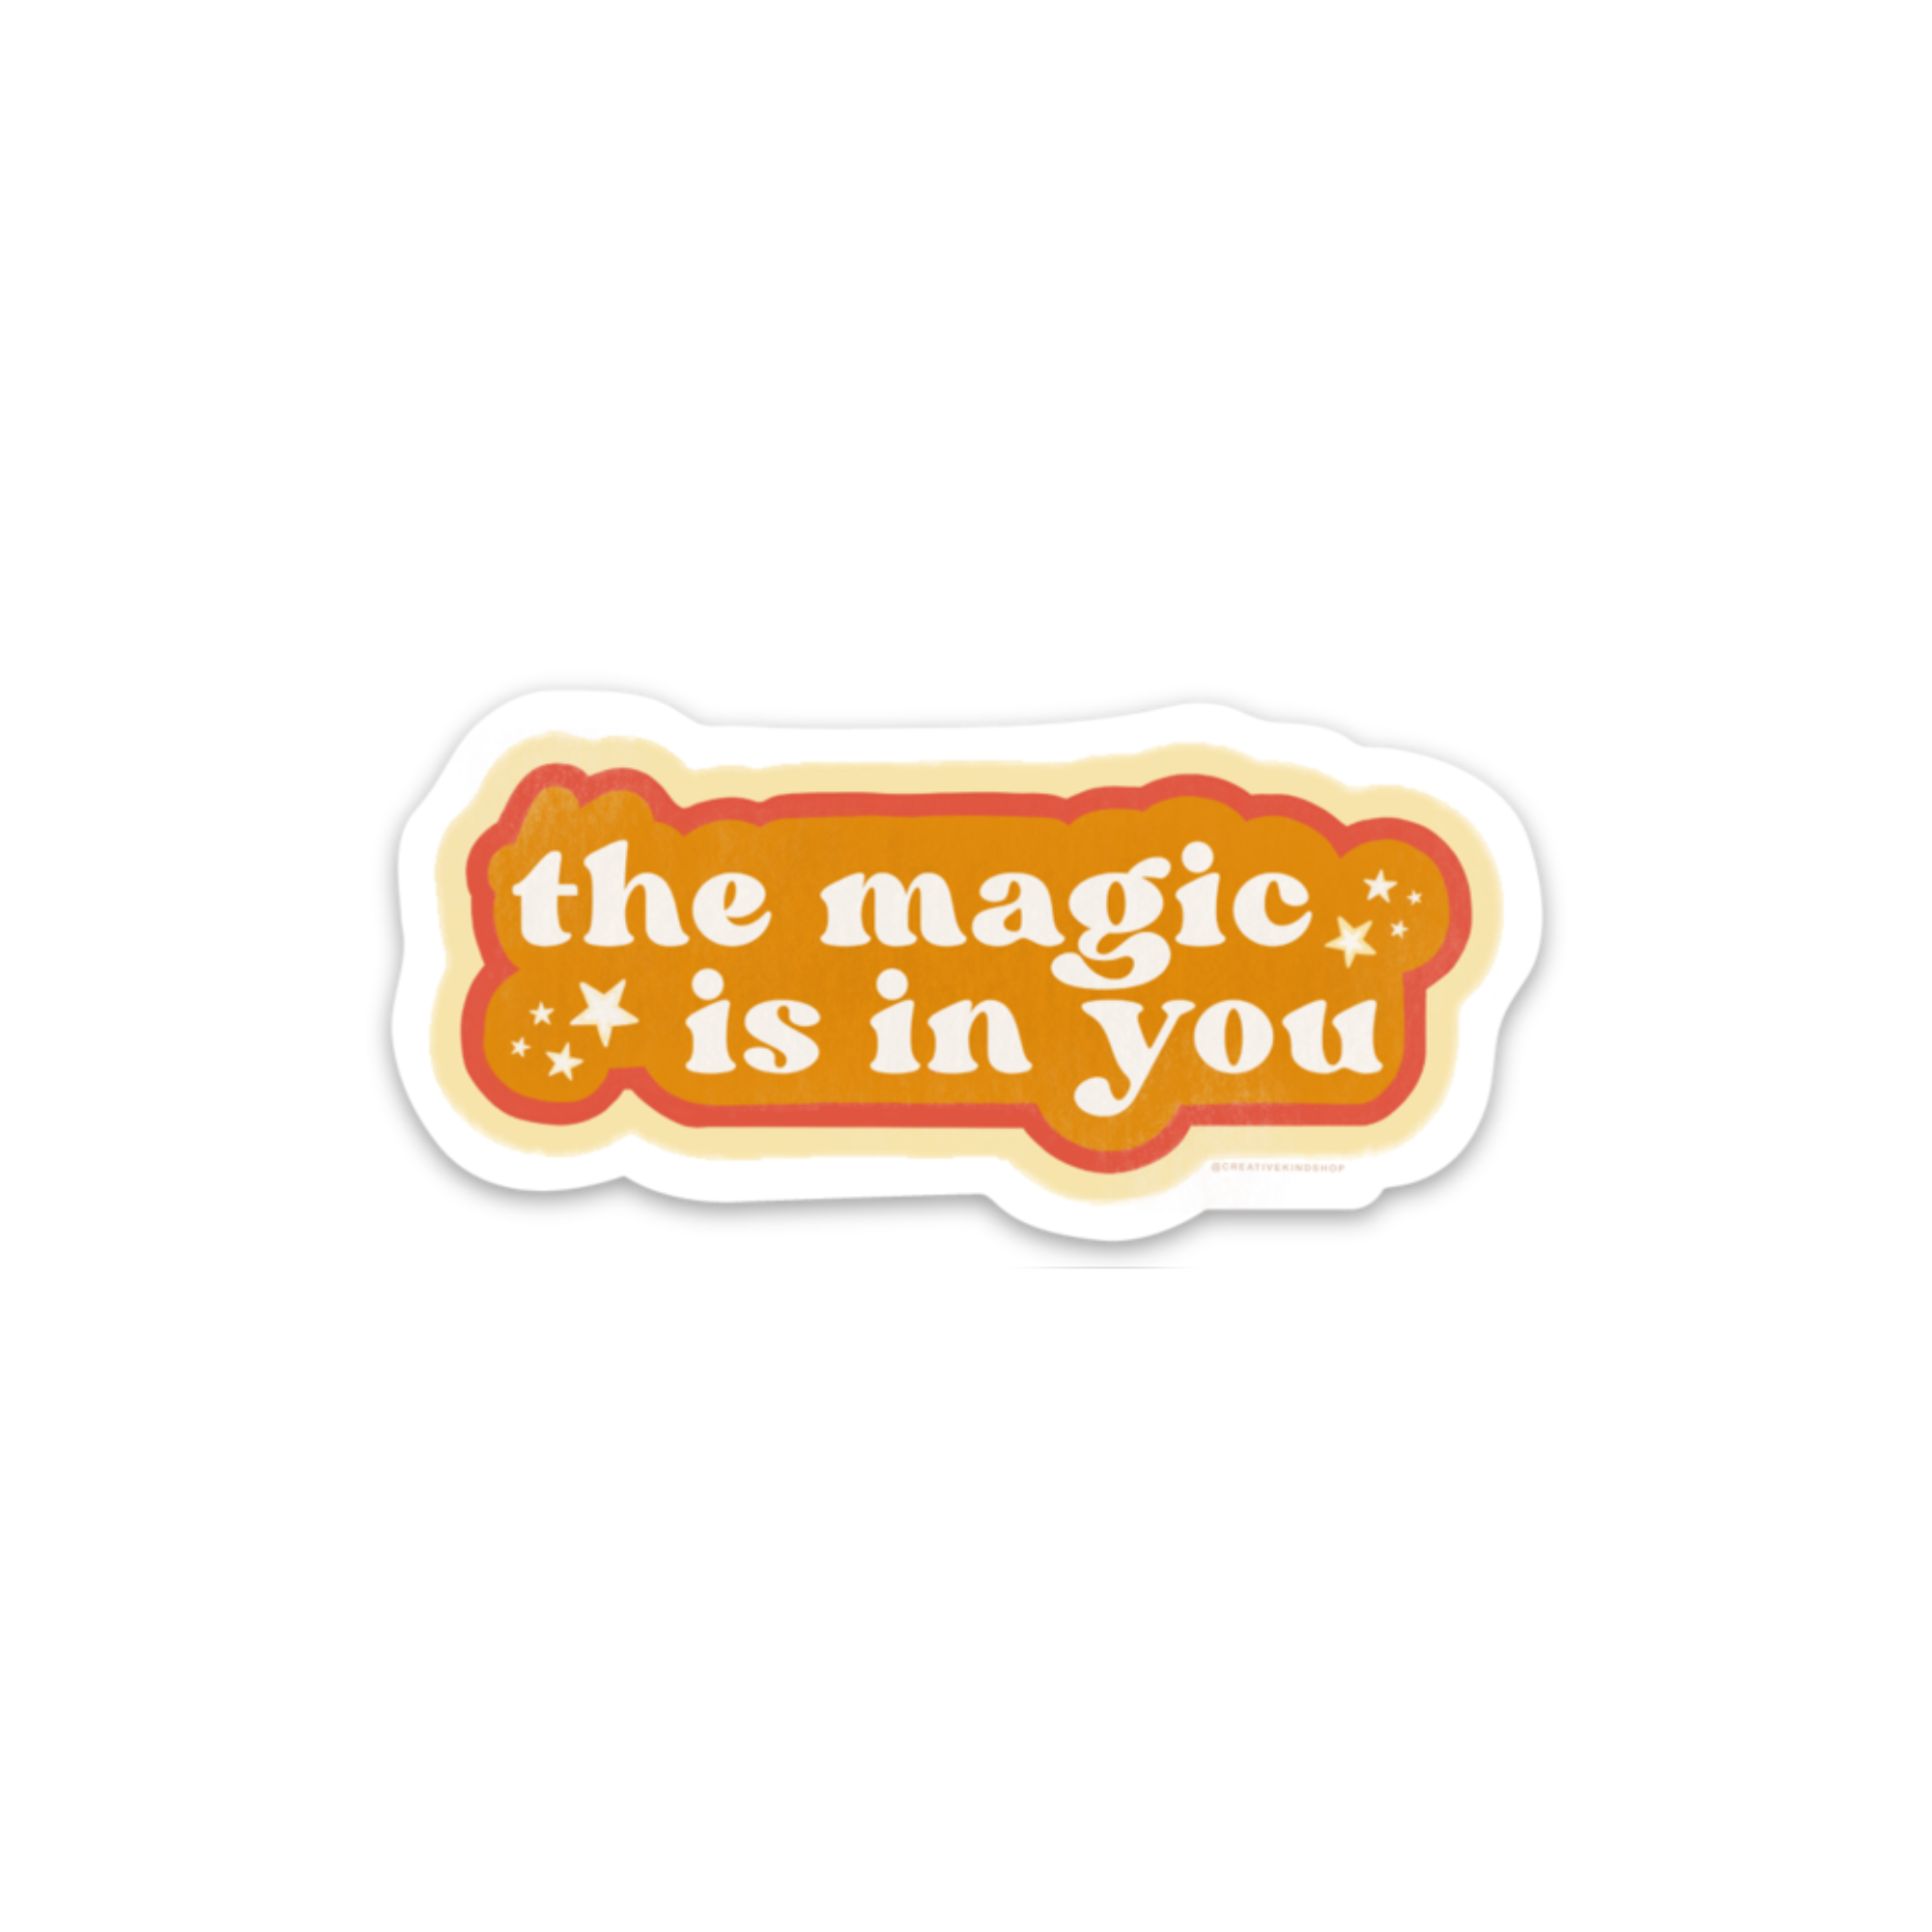 The Magic is in You Vinyl Sticker